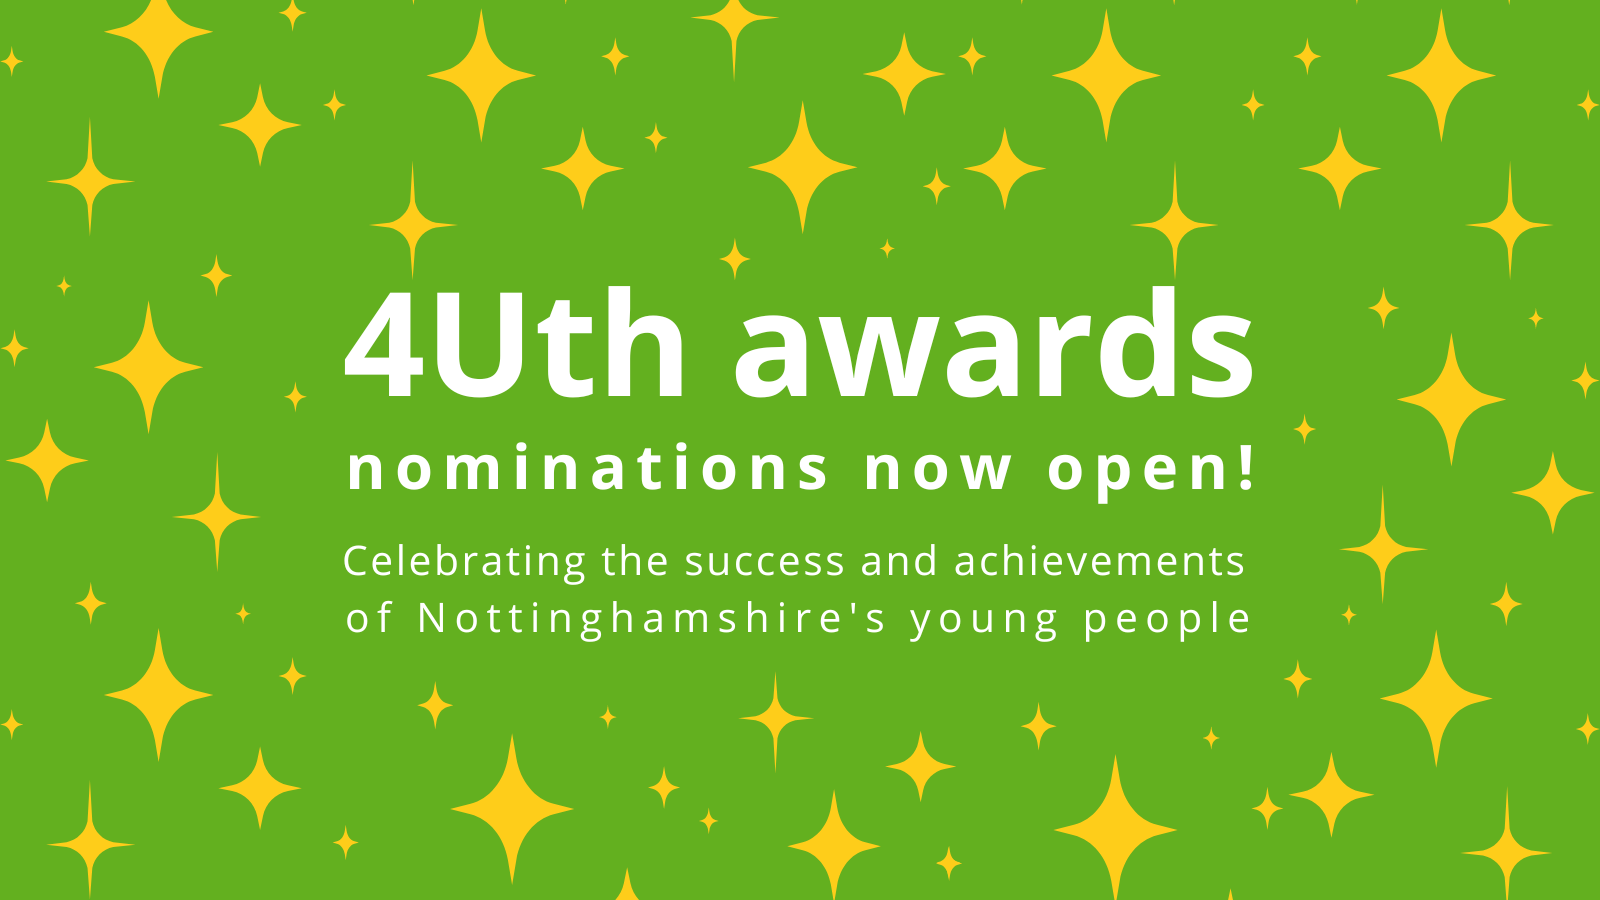 4Uth awards nominations now open